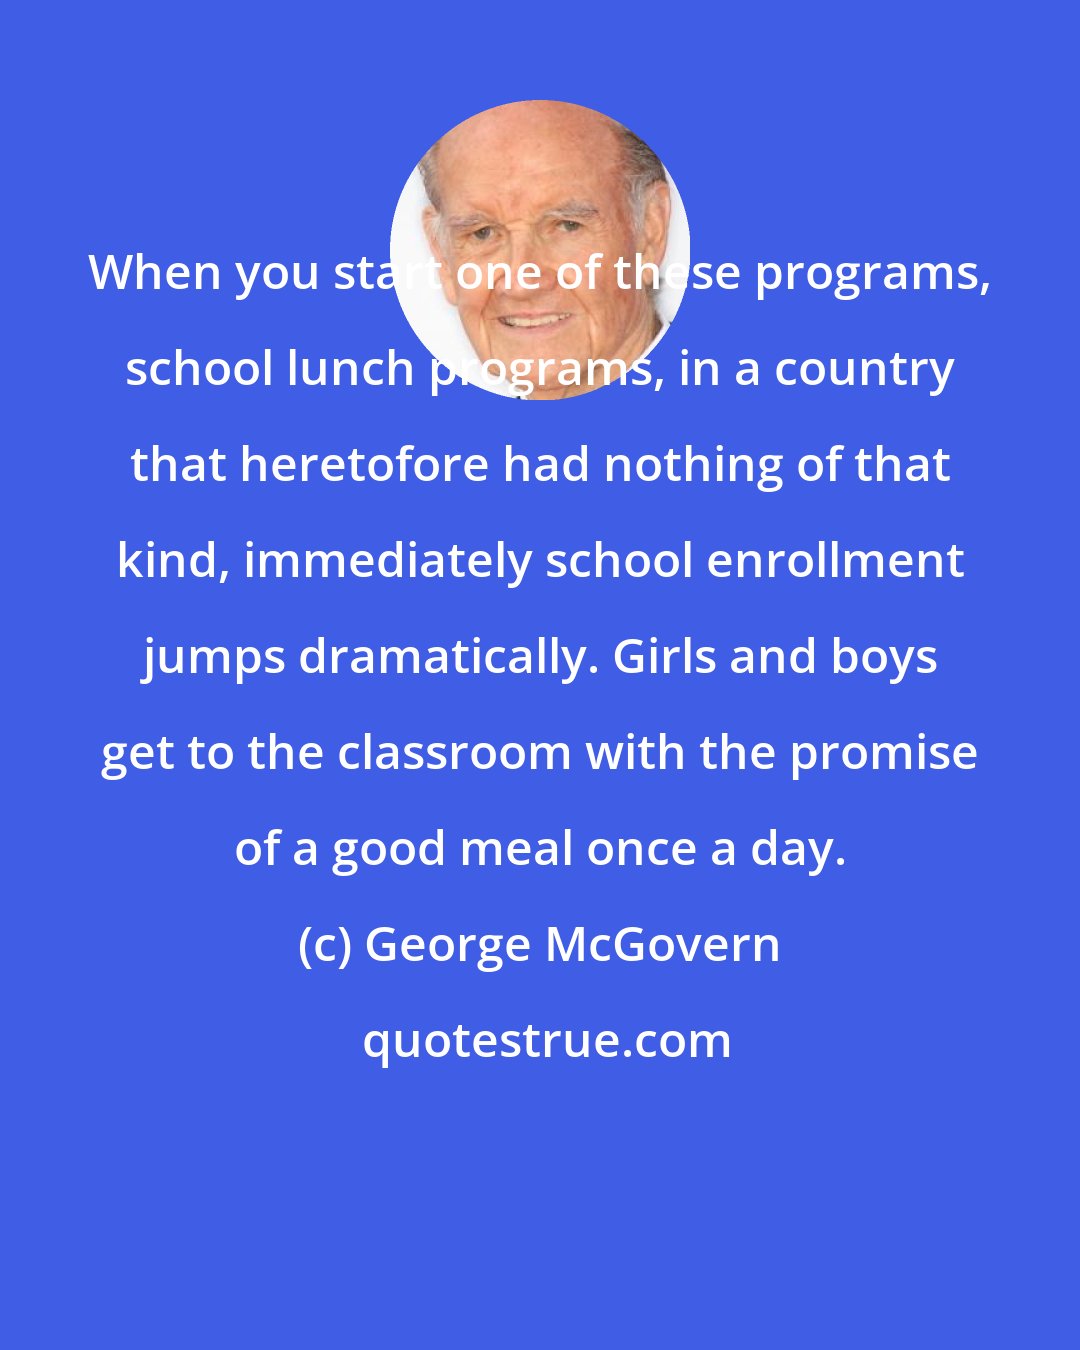 George McGovern: When you start one of these programs, school lunch programs, in a country that heretofore had nothing of that kind, immediately school enrollment jumps dramatically. Girls and boys get to the classroom with the promise of a good meal once a day.